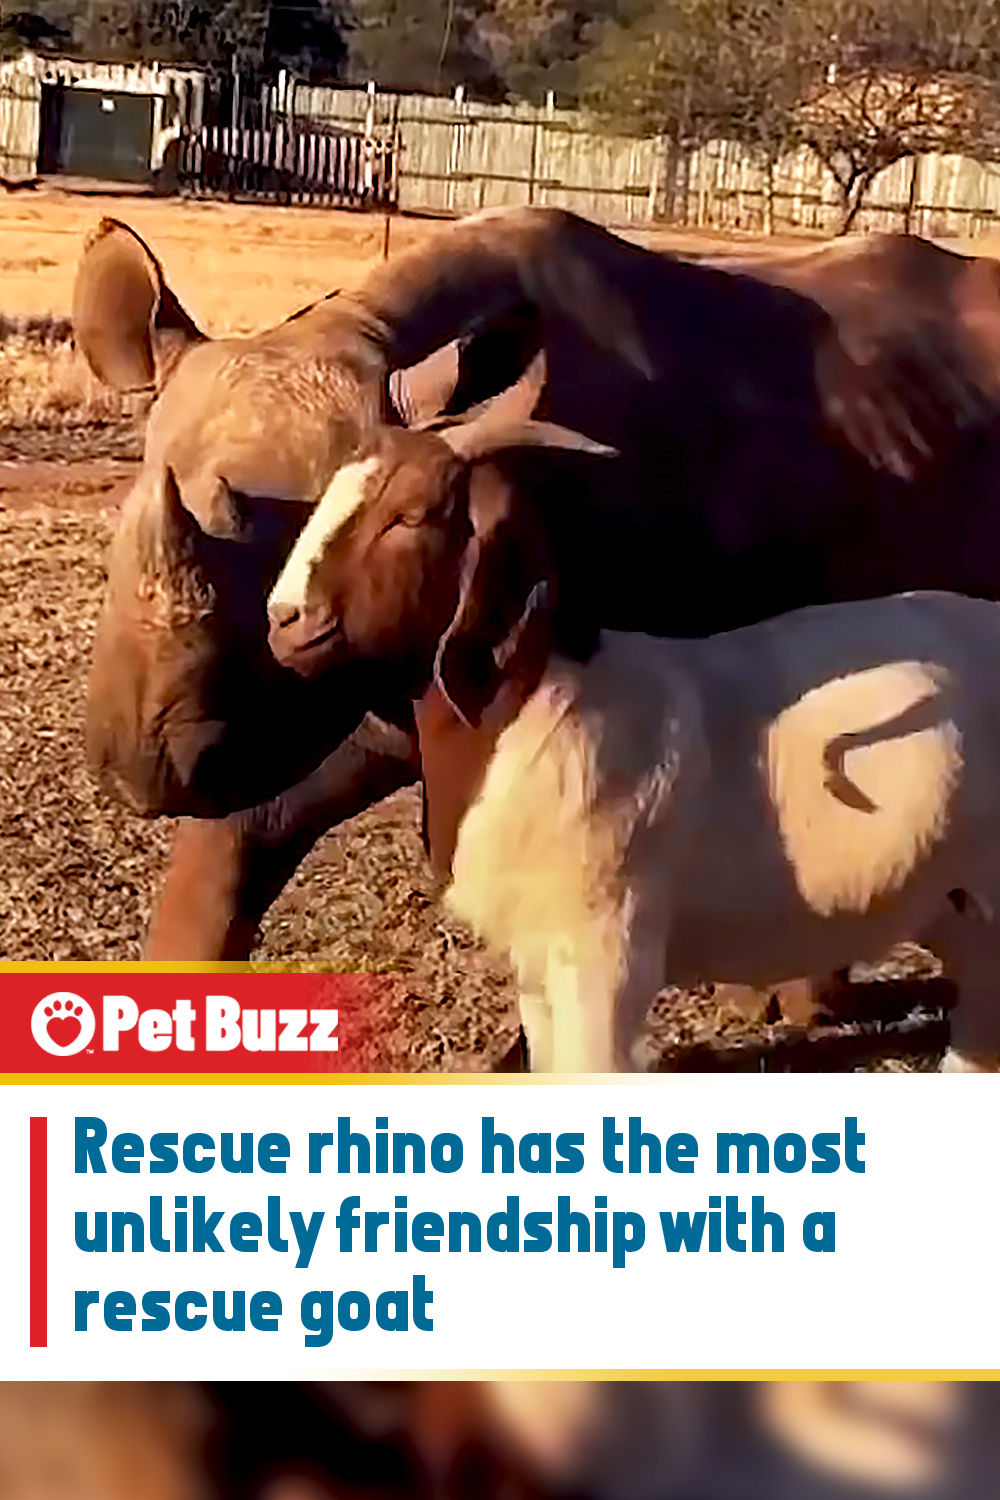 Rescue rhino has the most unlikely friendship with a rescue goat